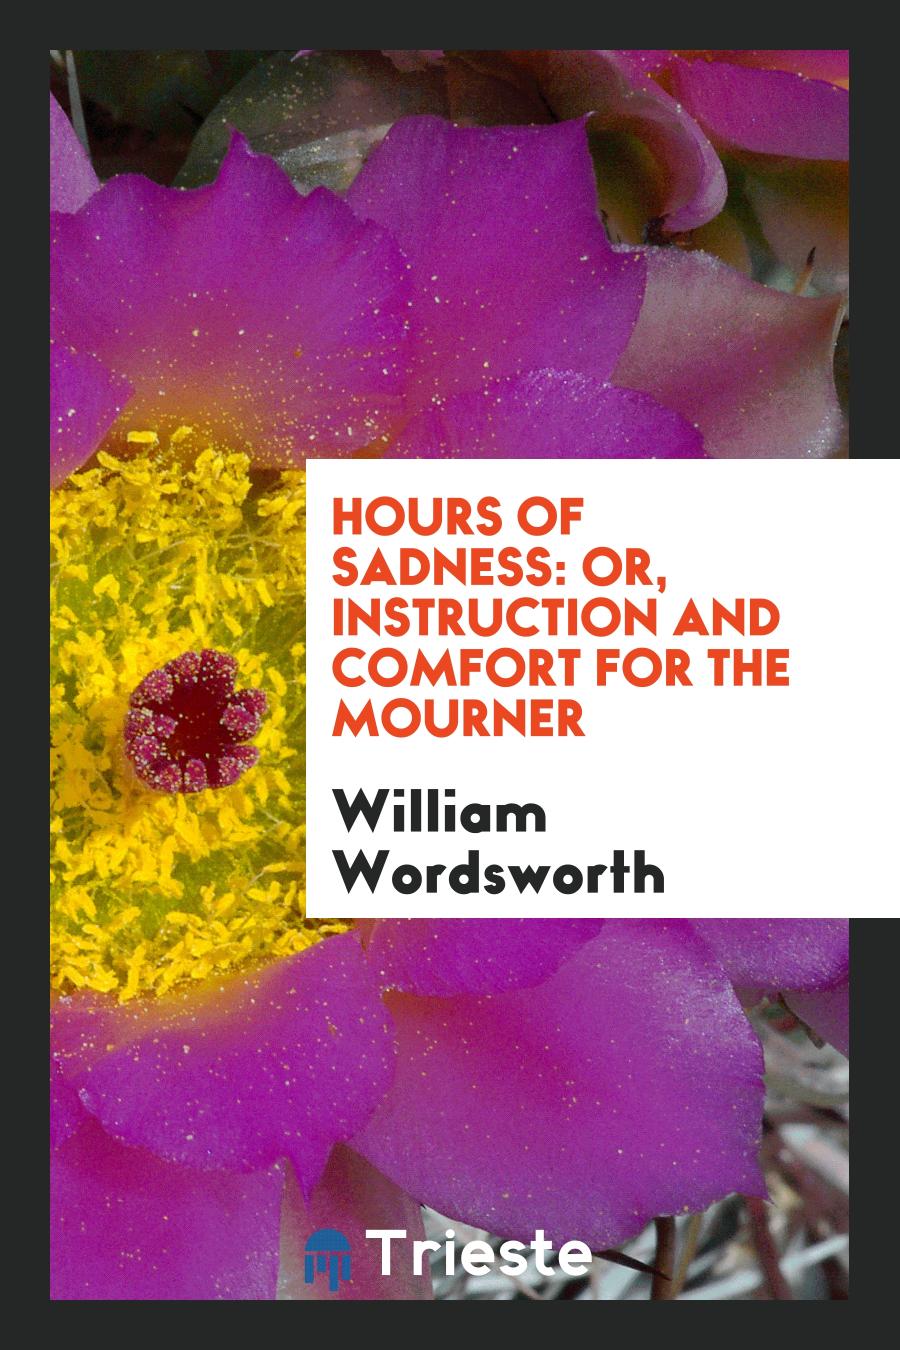 Hours of Sadness: Or, Instruction and Comfort for the Mourner